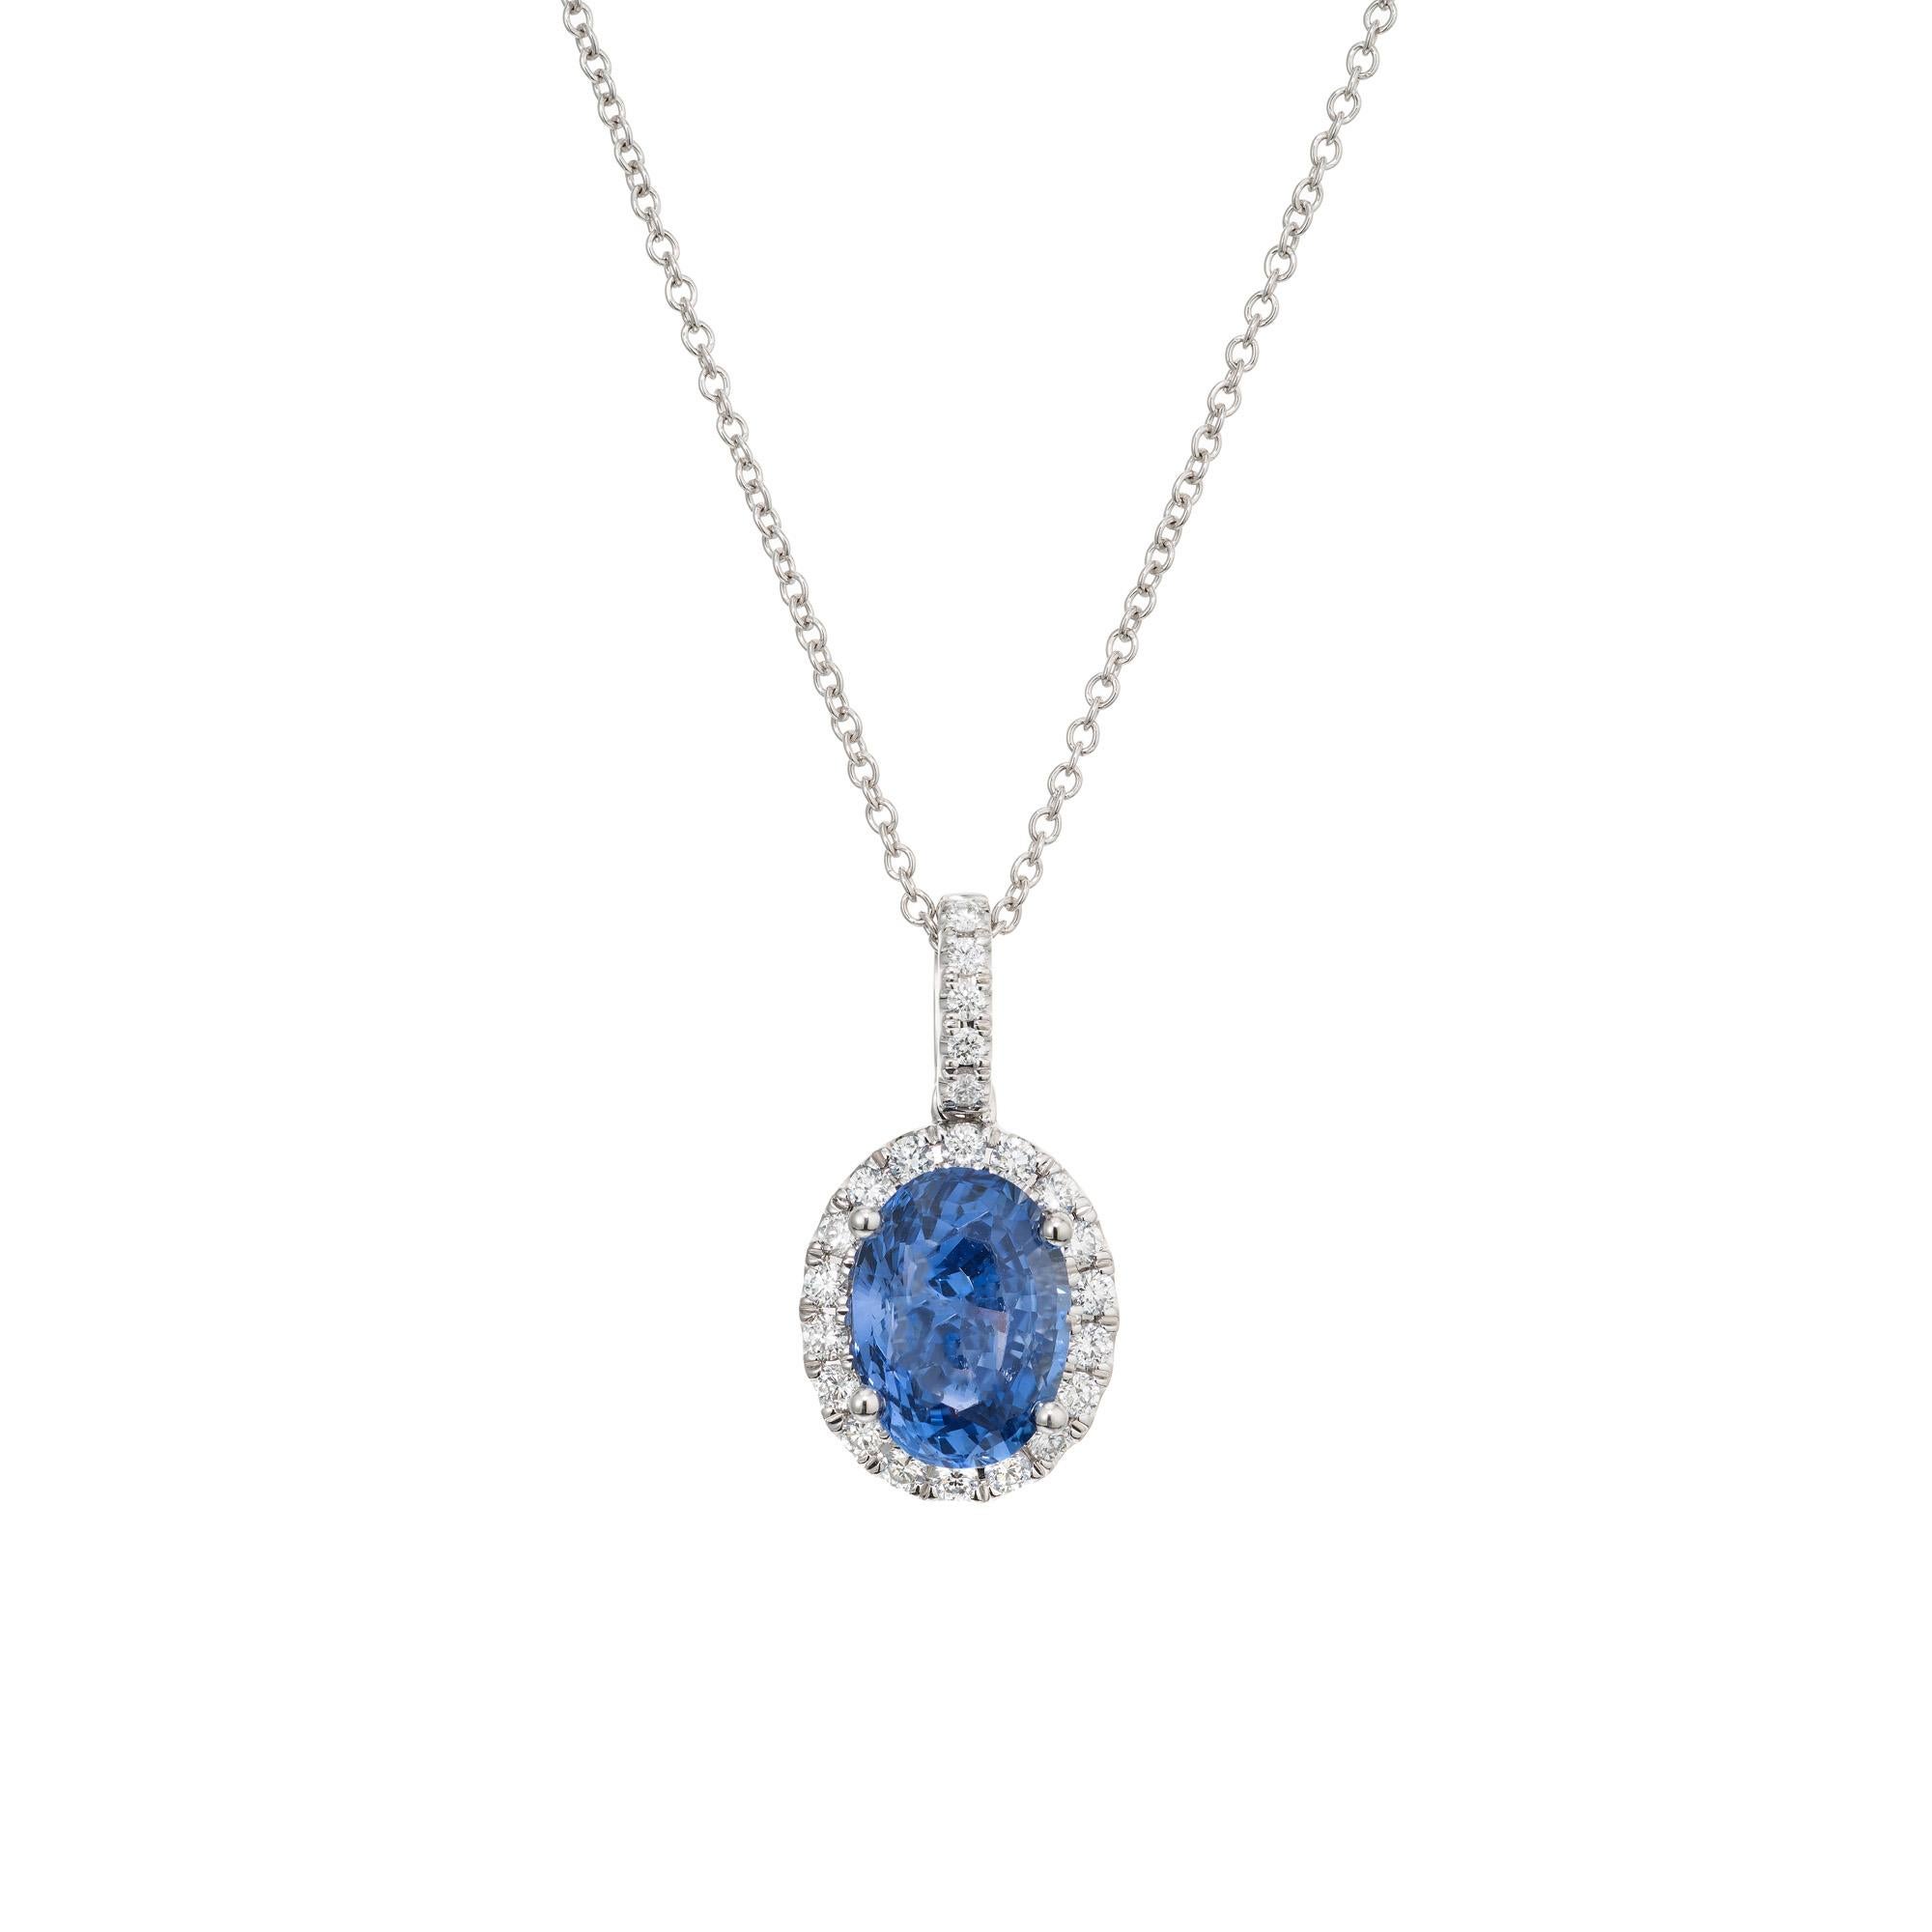 Crisp and bright sapphire and diamond in a classic pendant necklace. A stunning 2.50 Carat oval sapphire is at the center of this 14k white gold setting, accented by 23 round brilliant cut shimmering diamonds, creating a luxurious and eye-catching